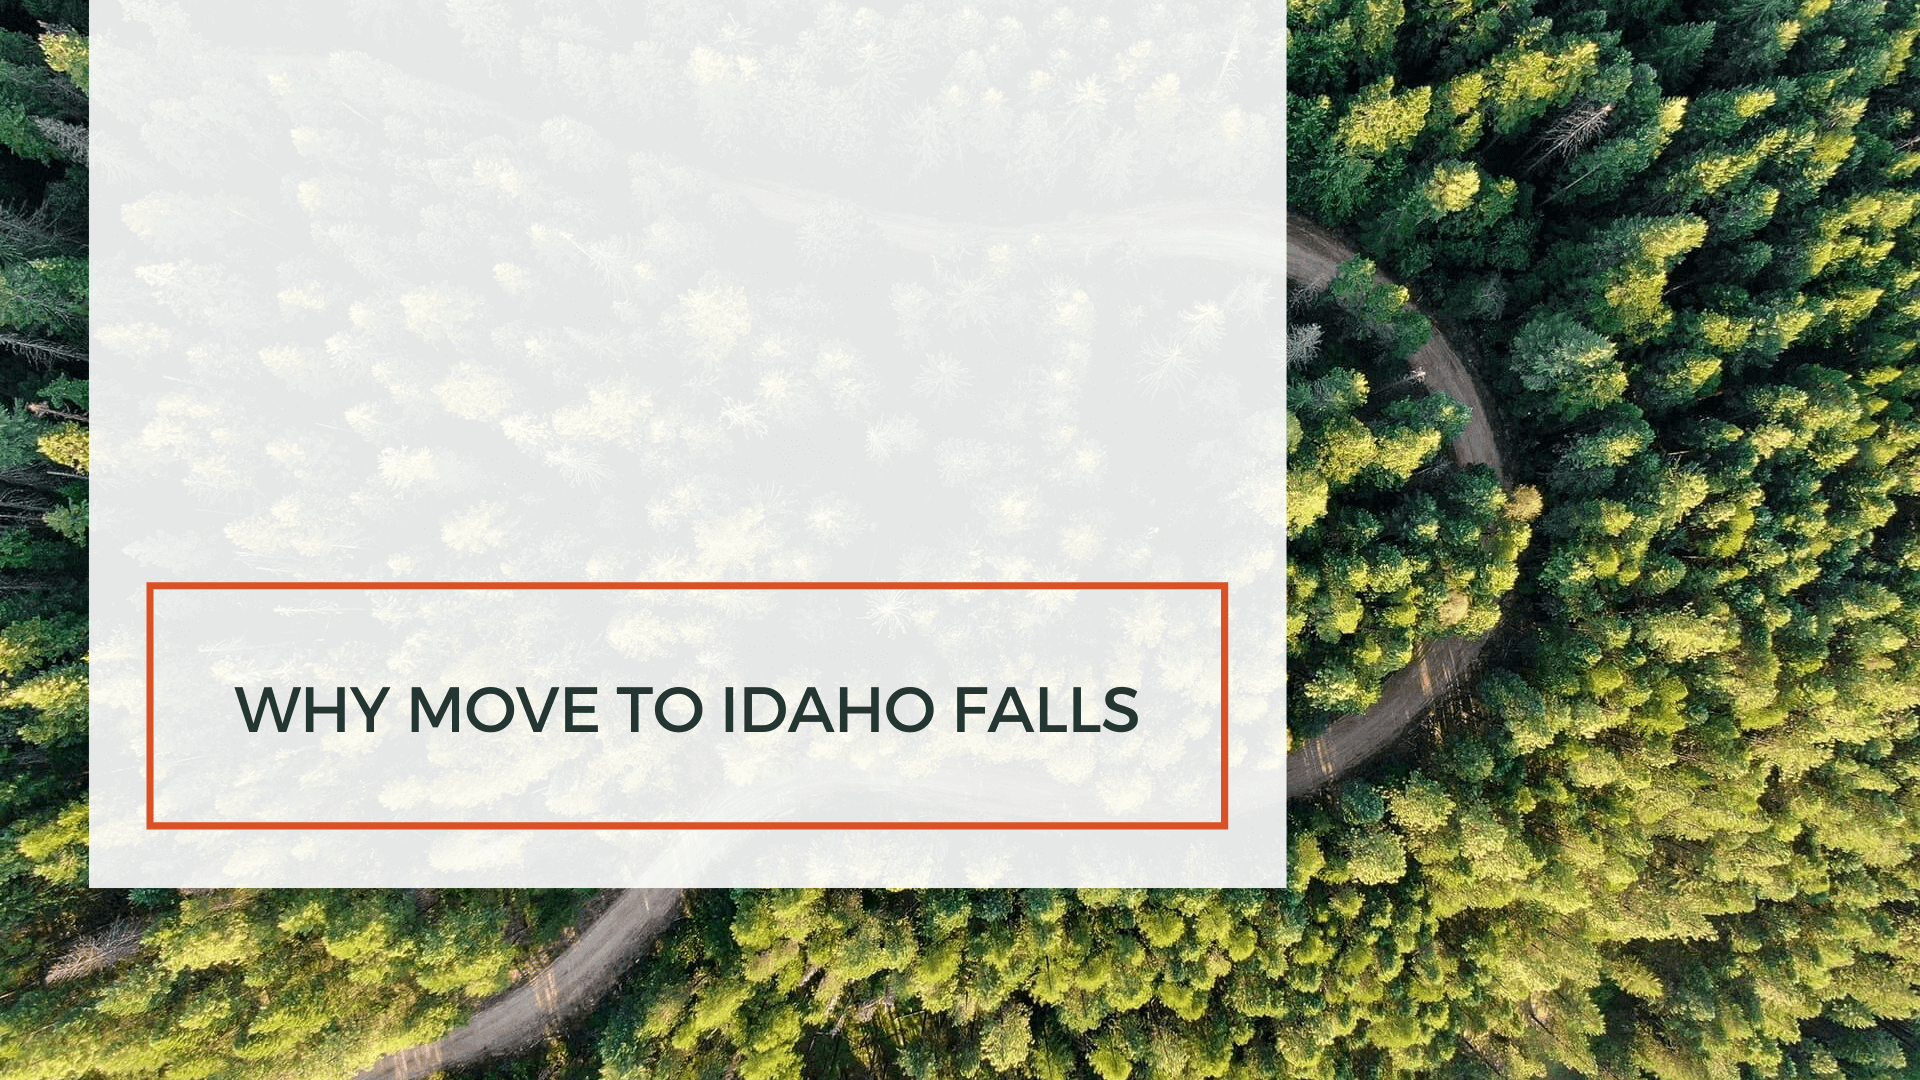 Considering Moving to Idaho Falls? Here is Why You Should!